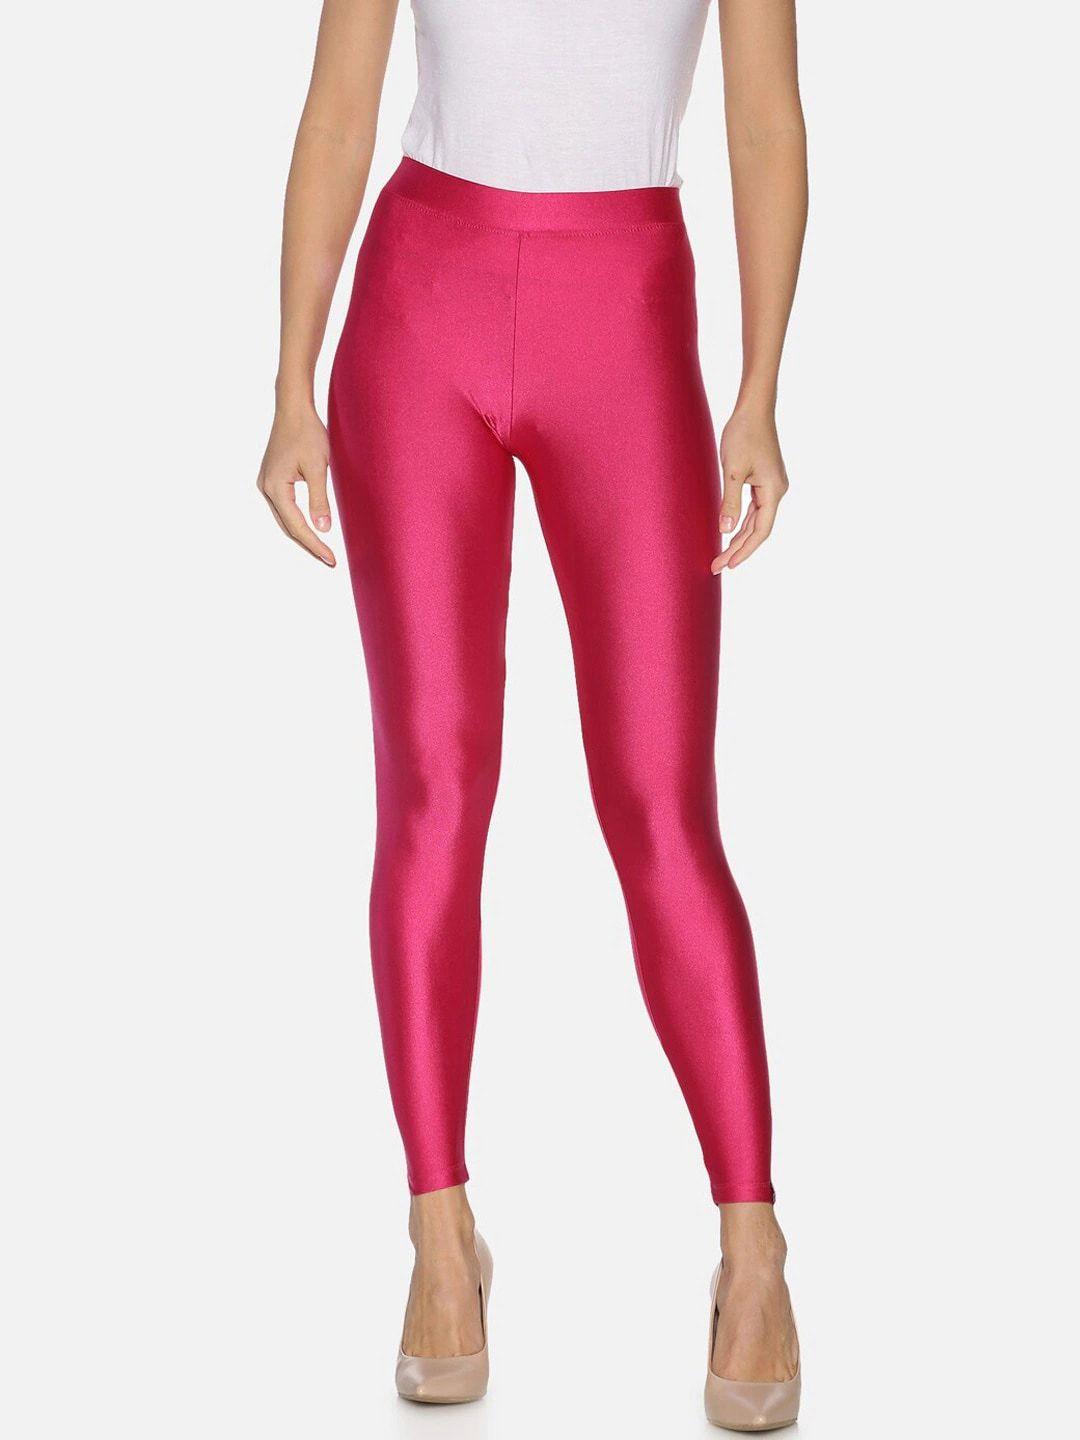 twin birds women fuchsia pink coloured solid shimmer ankle-length leggings